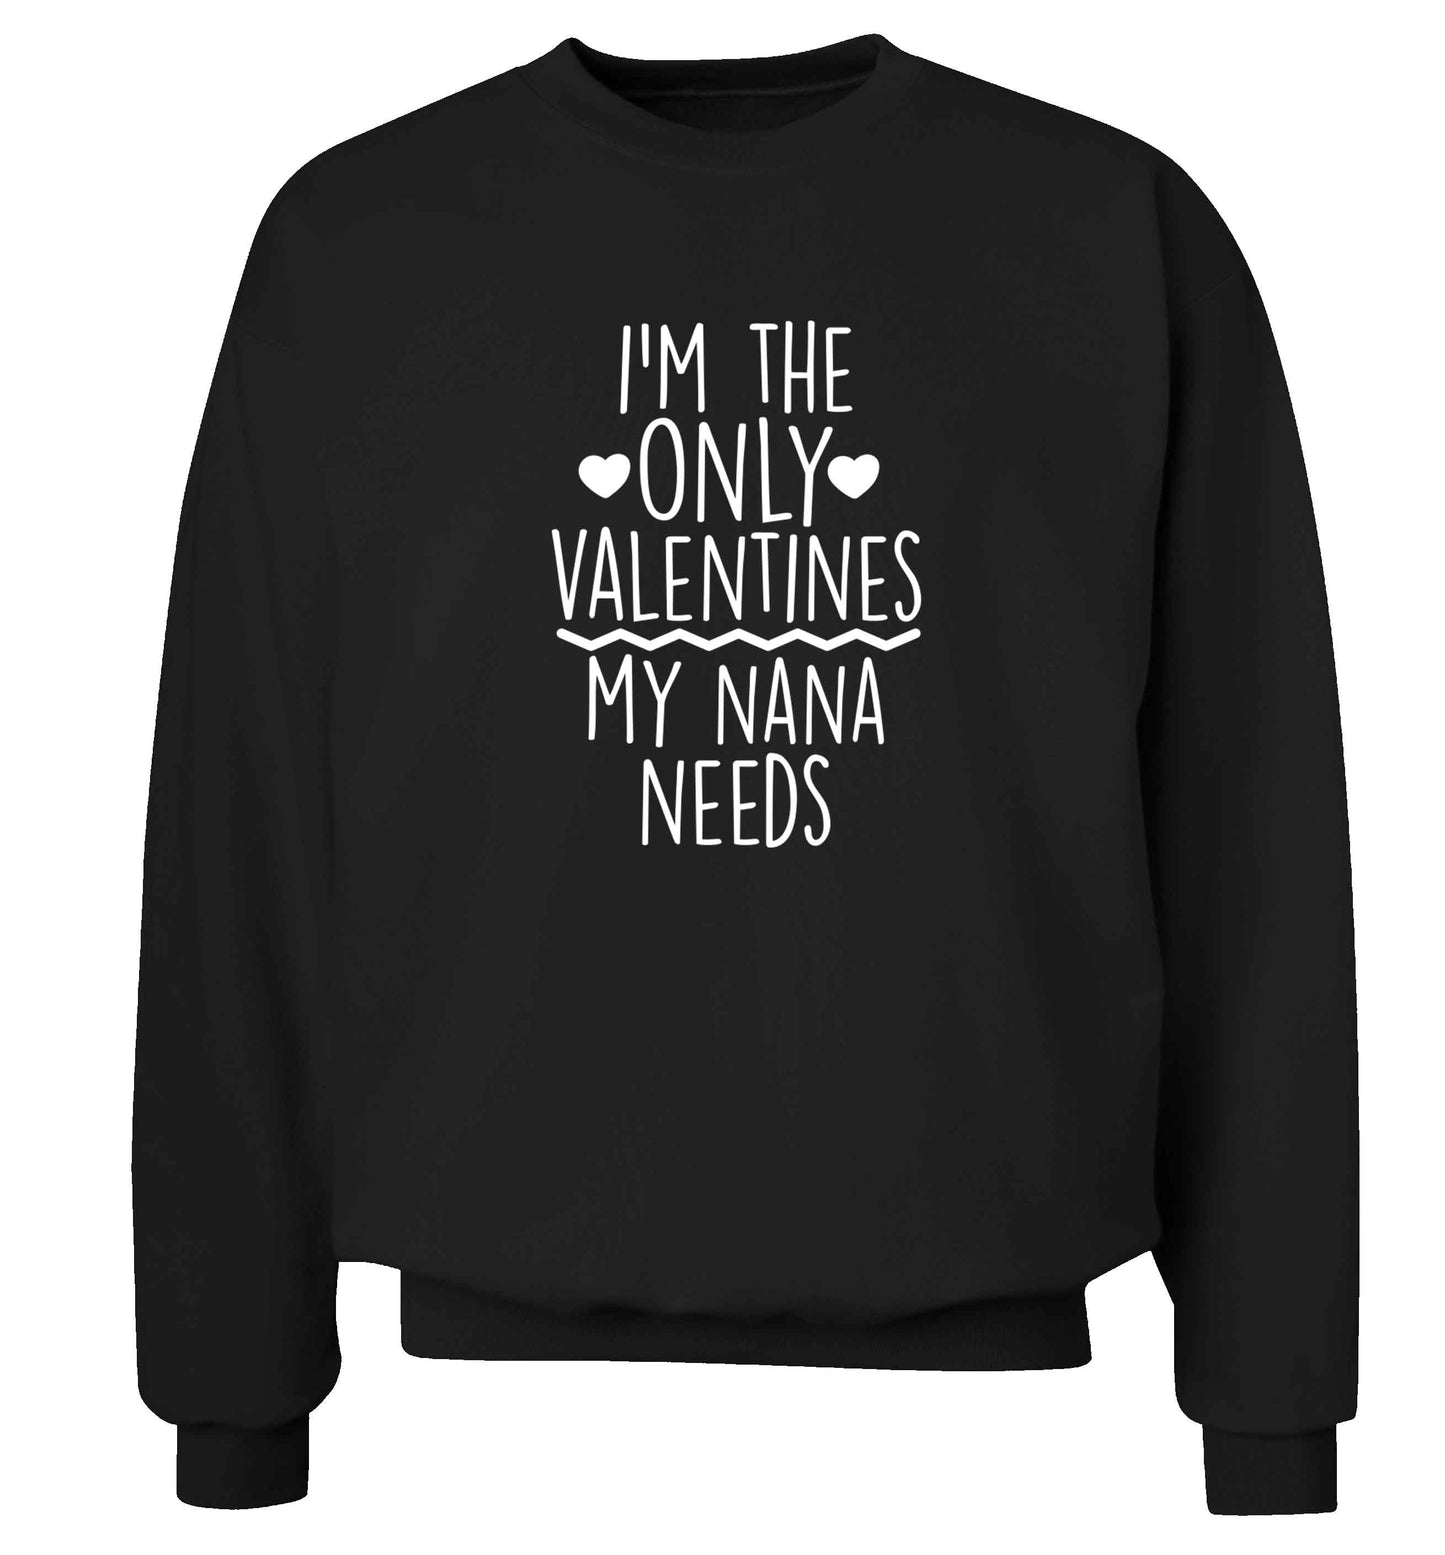 I'm the only valentines my nana needs adult's unisex black sweater 2XL